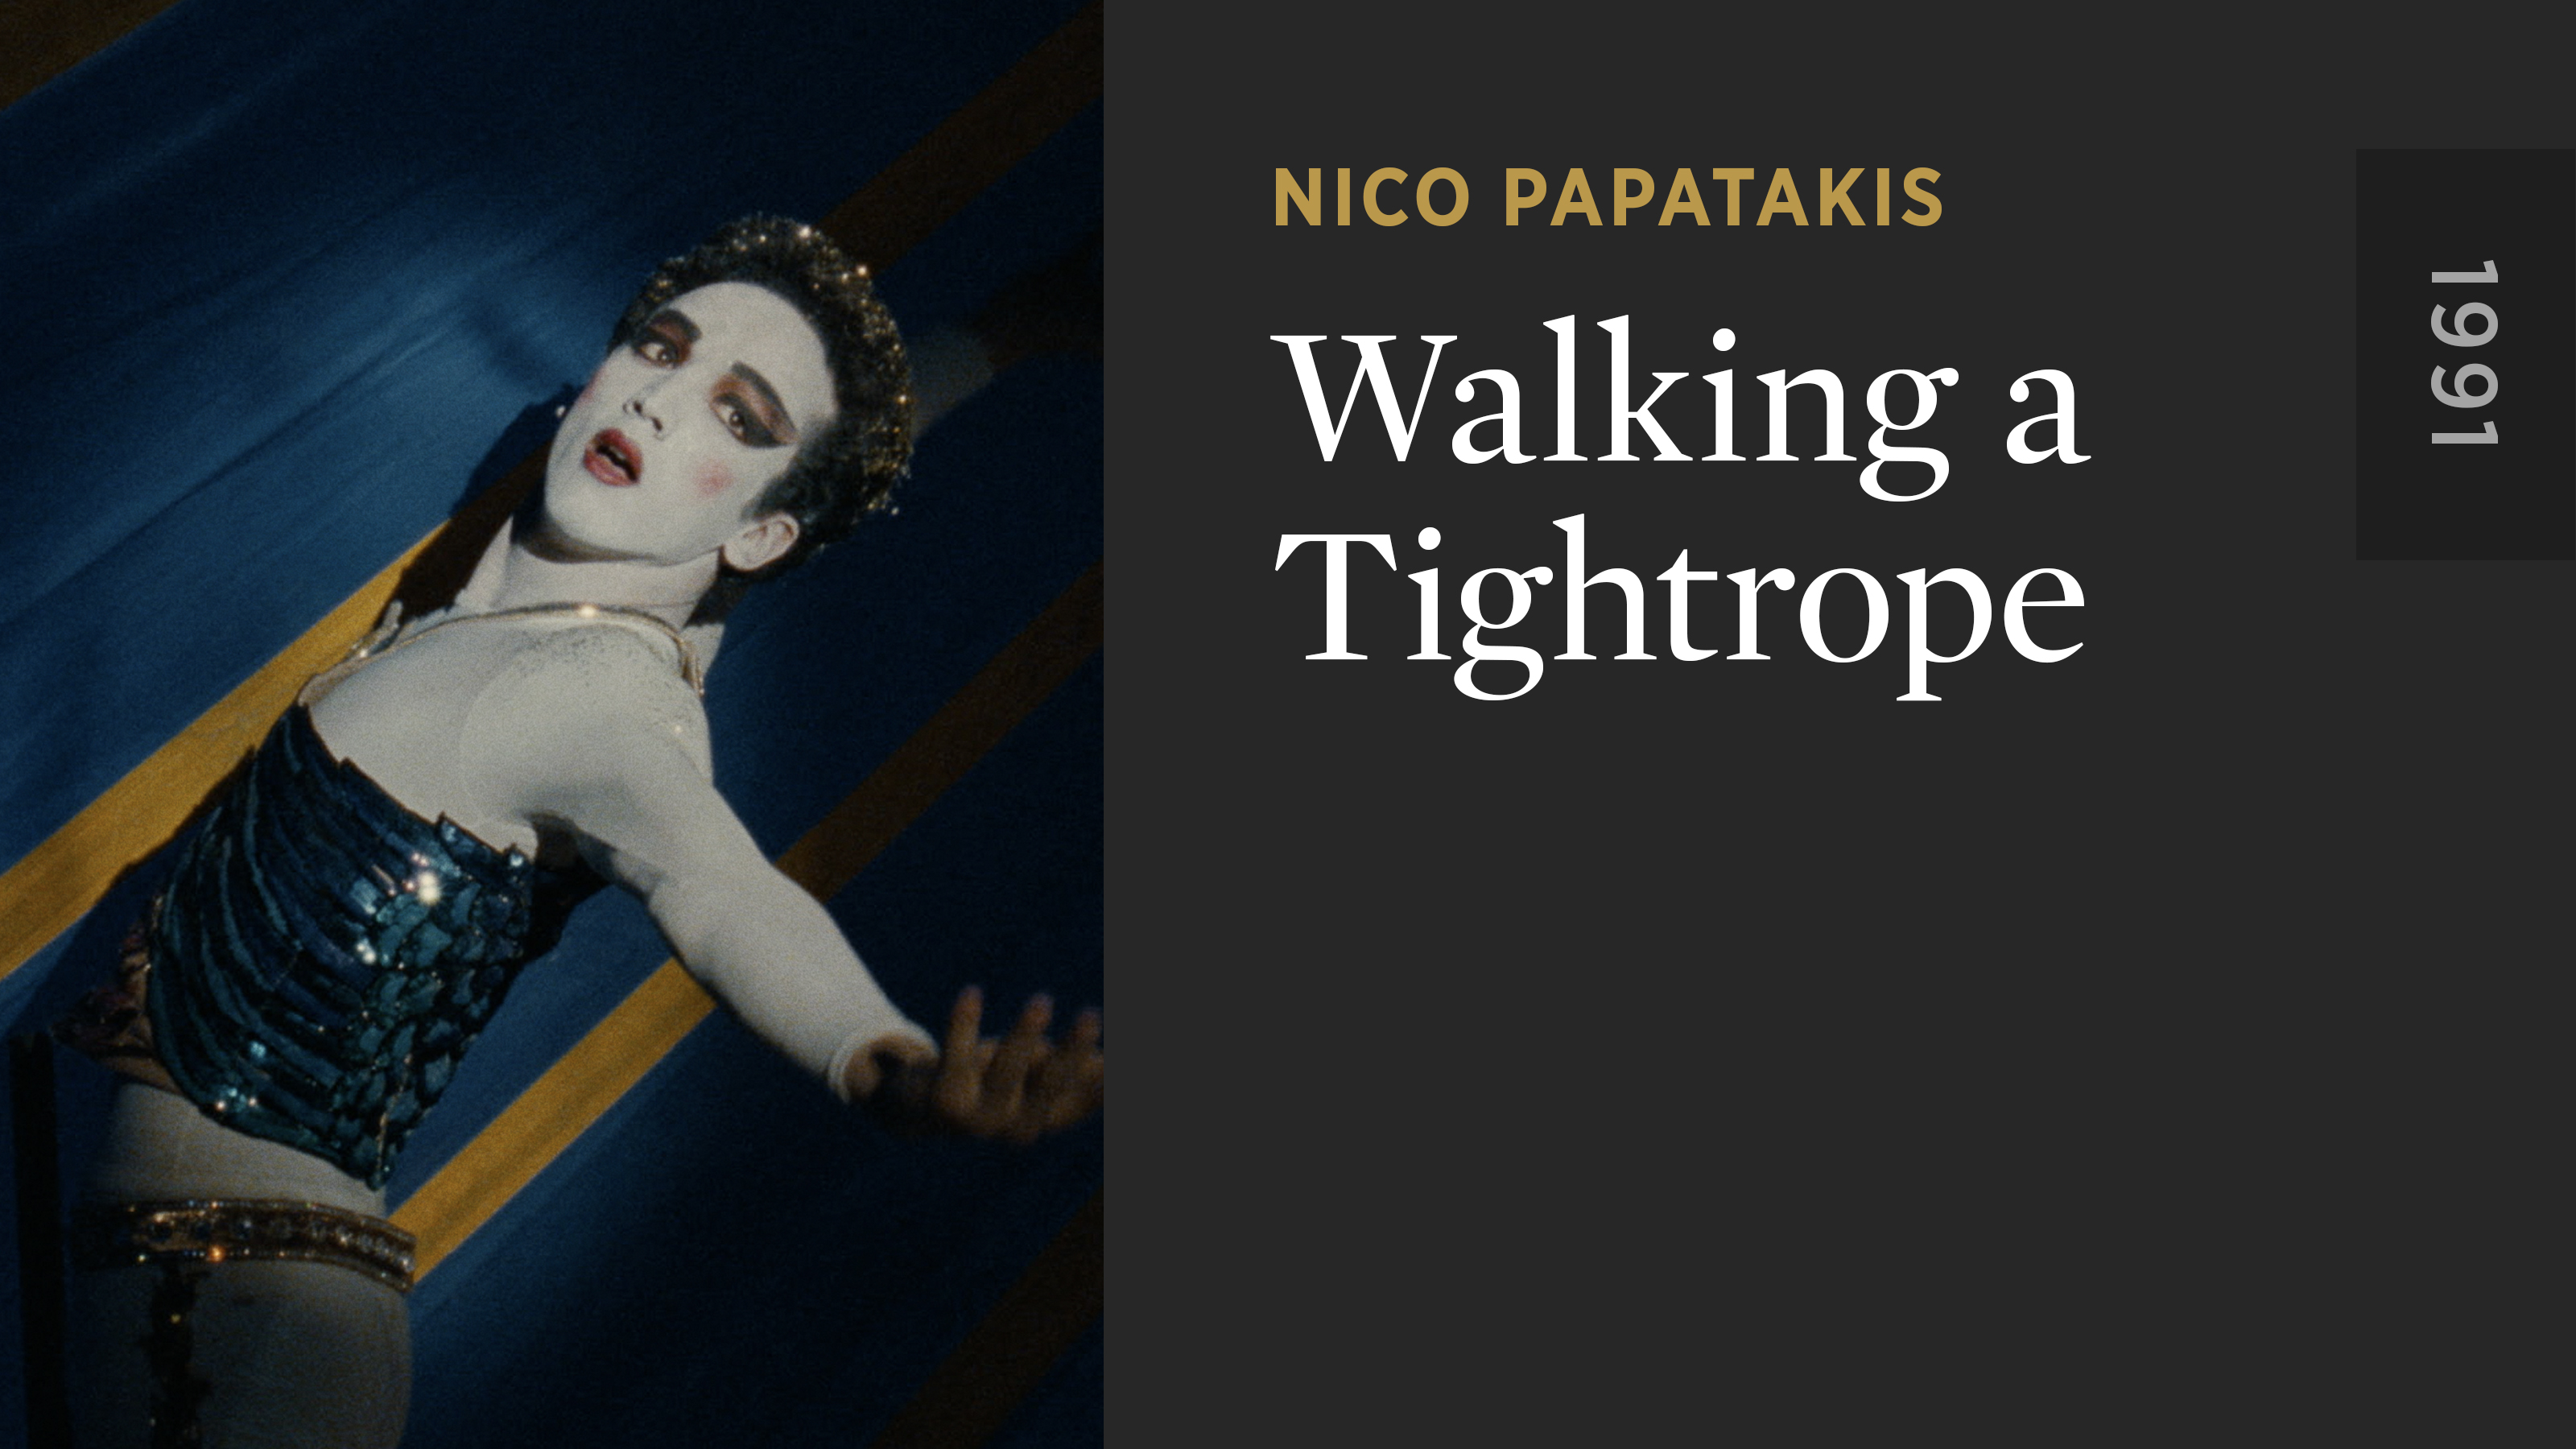 Walking a Tightrope - The Criterion Channel